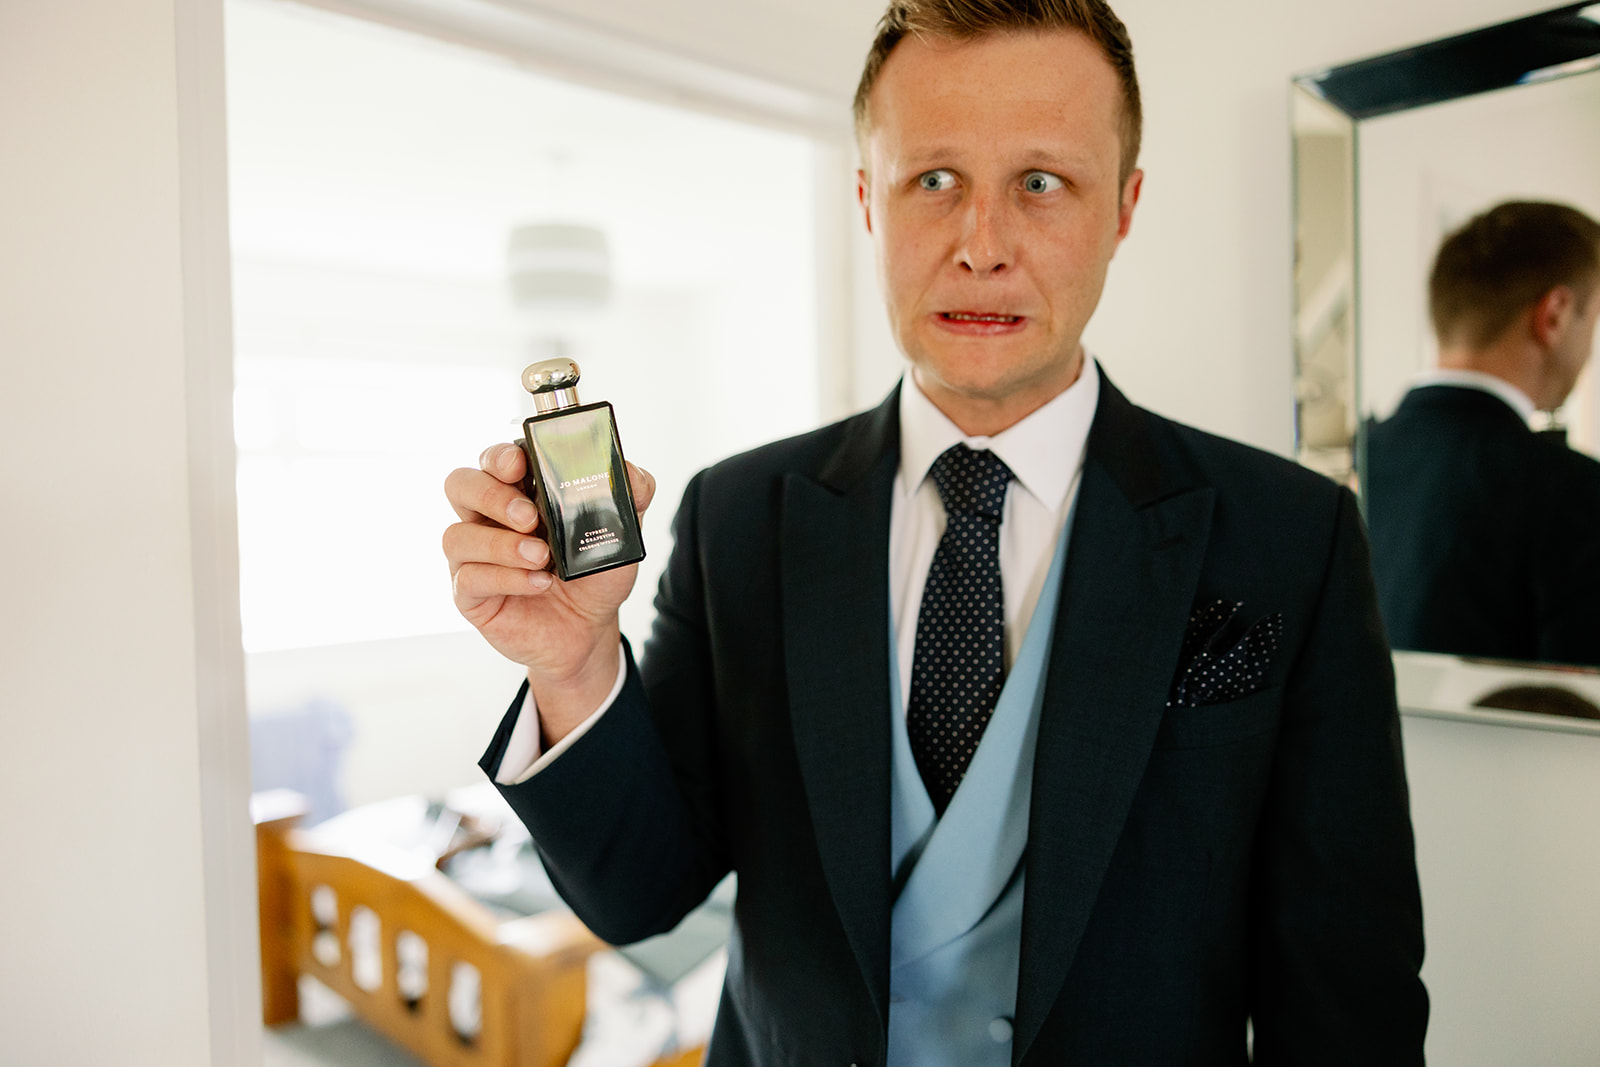 The groom pulling a silly face whilst holding a bottle of Jo Malone fragrance